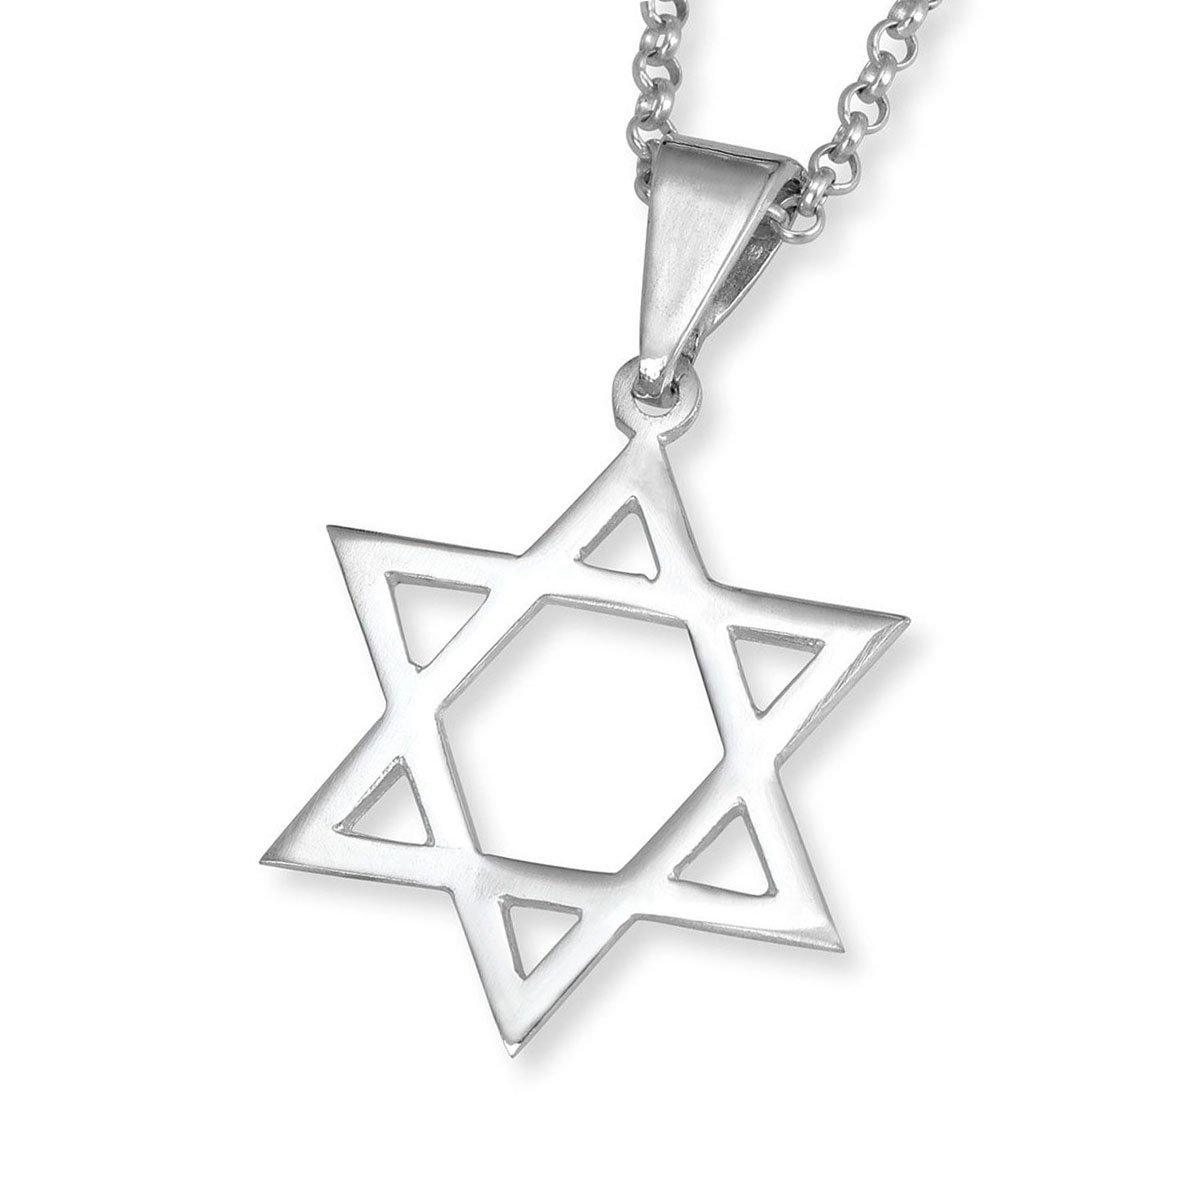 FREE GIFT BAG GORGEOUS STAR OF DAVID PENDANT & NECKLACE 